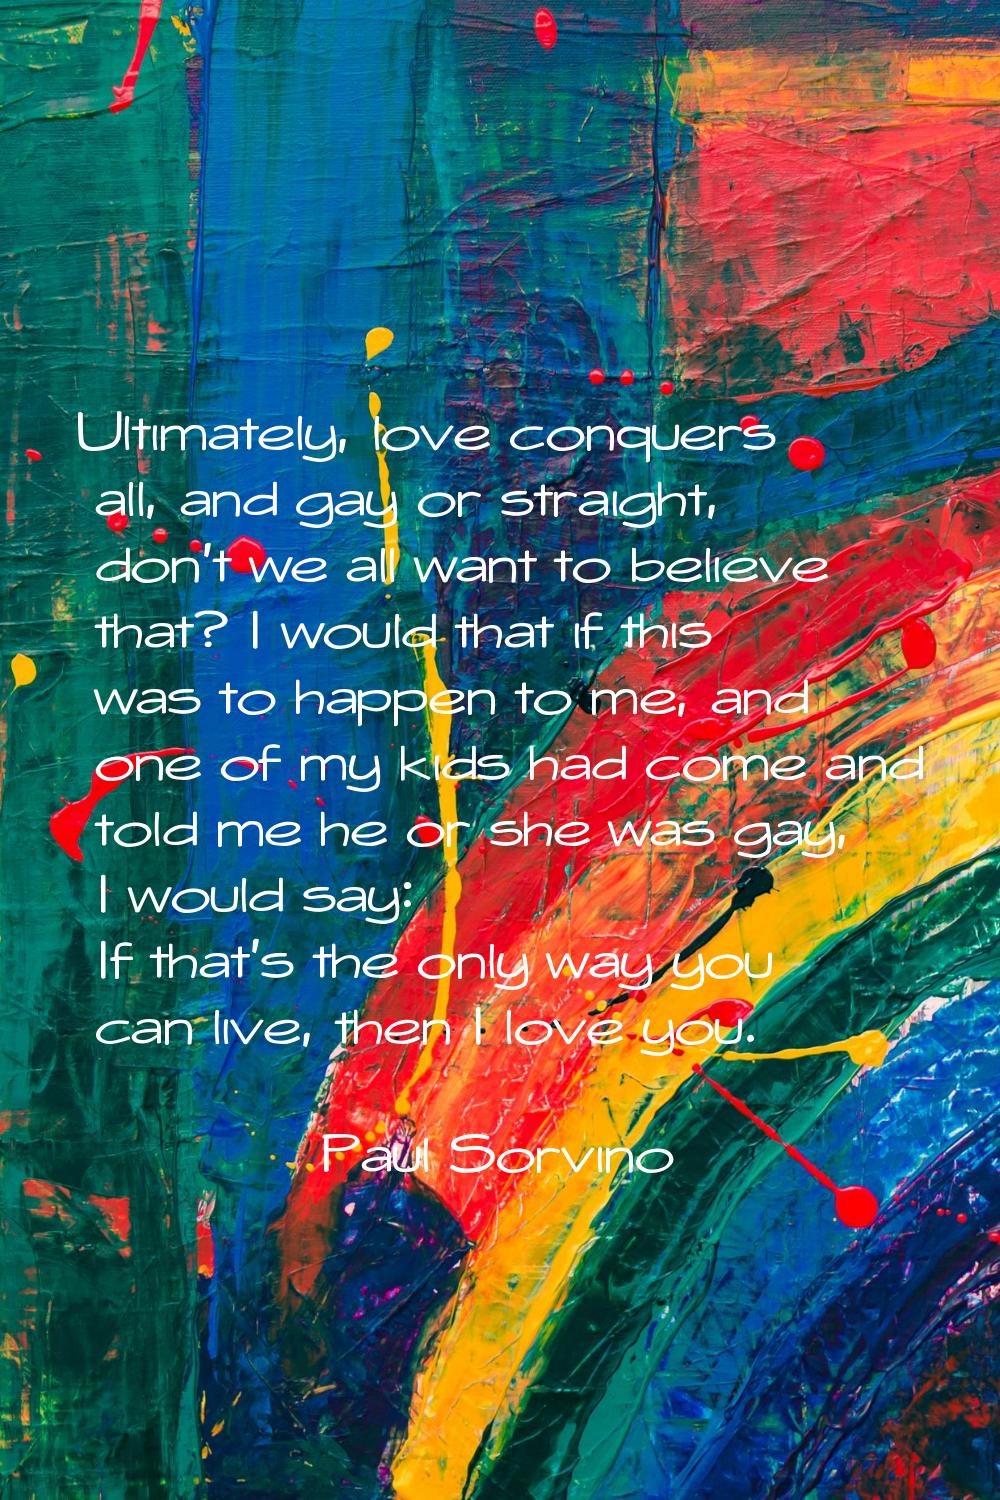 Ultimately, love conquers all, and gay or straight, don't we all want to believe that? I would that